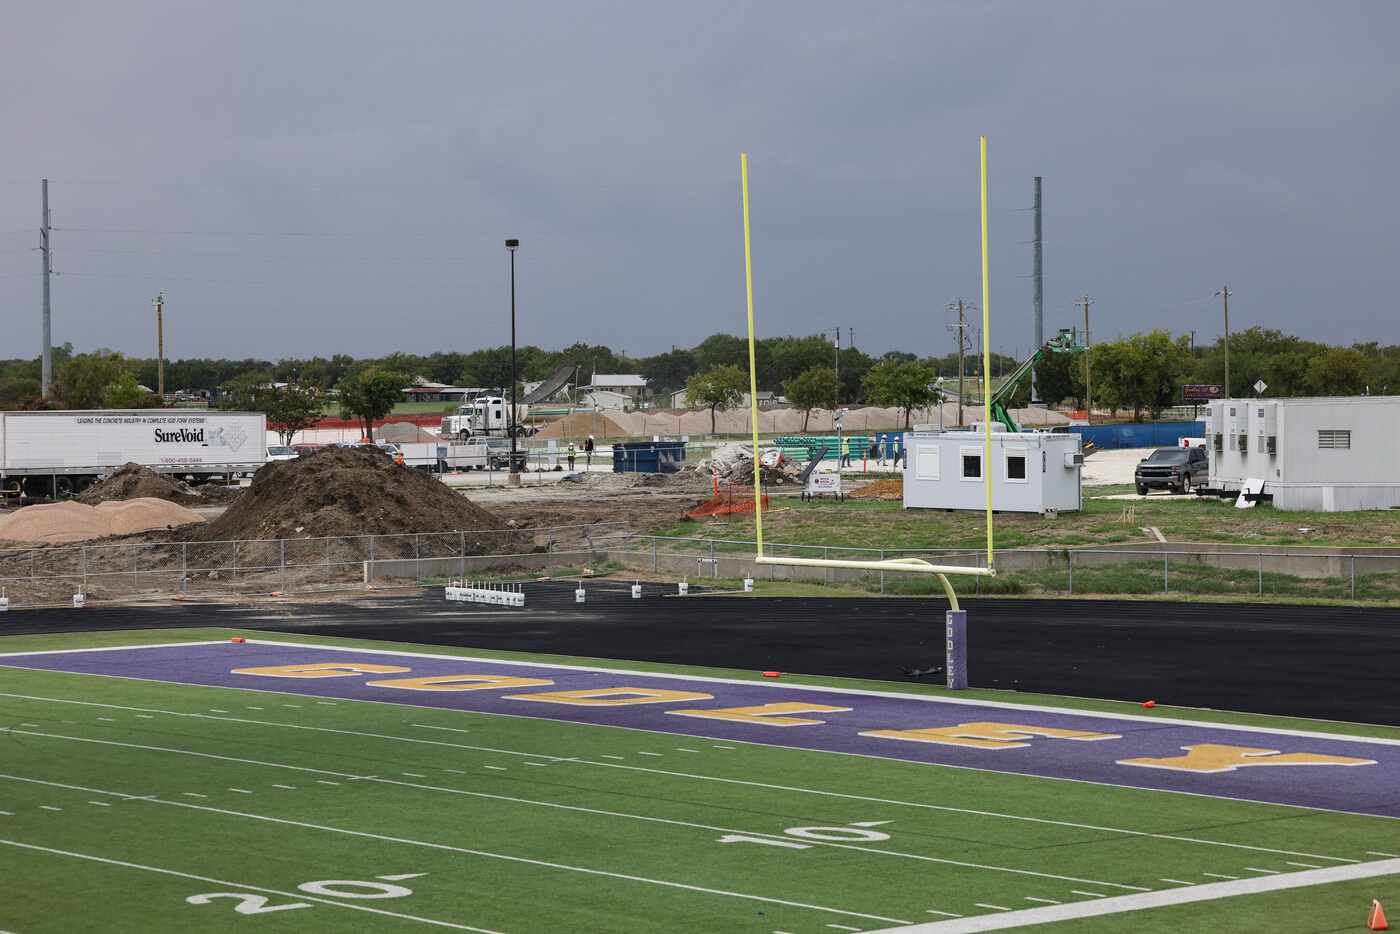 Construction is ongoing behind Wildcat Stadium in Godley.